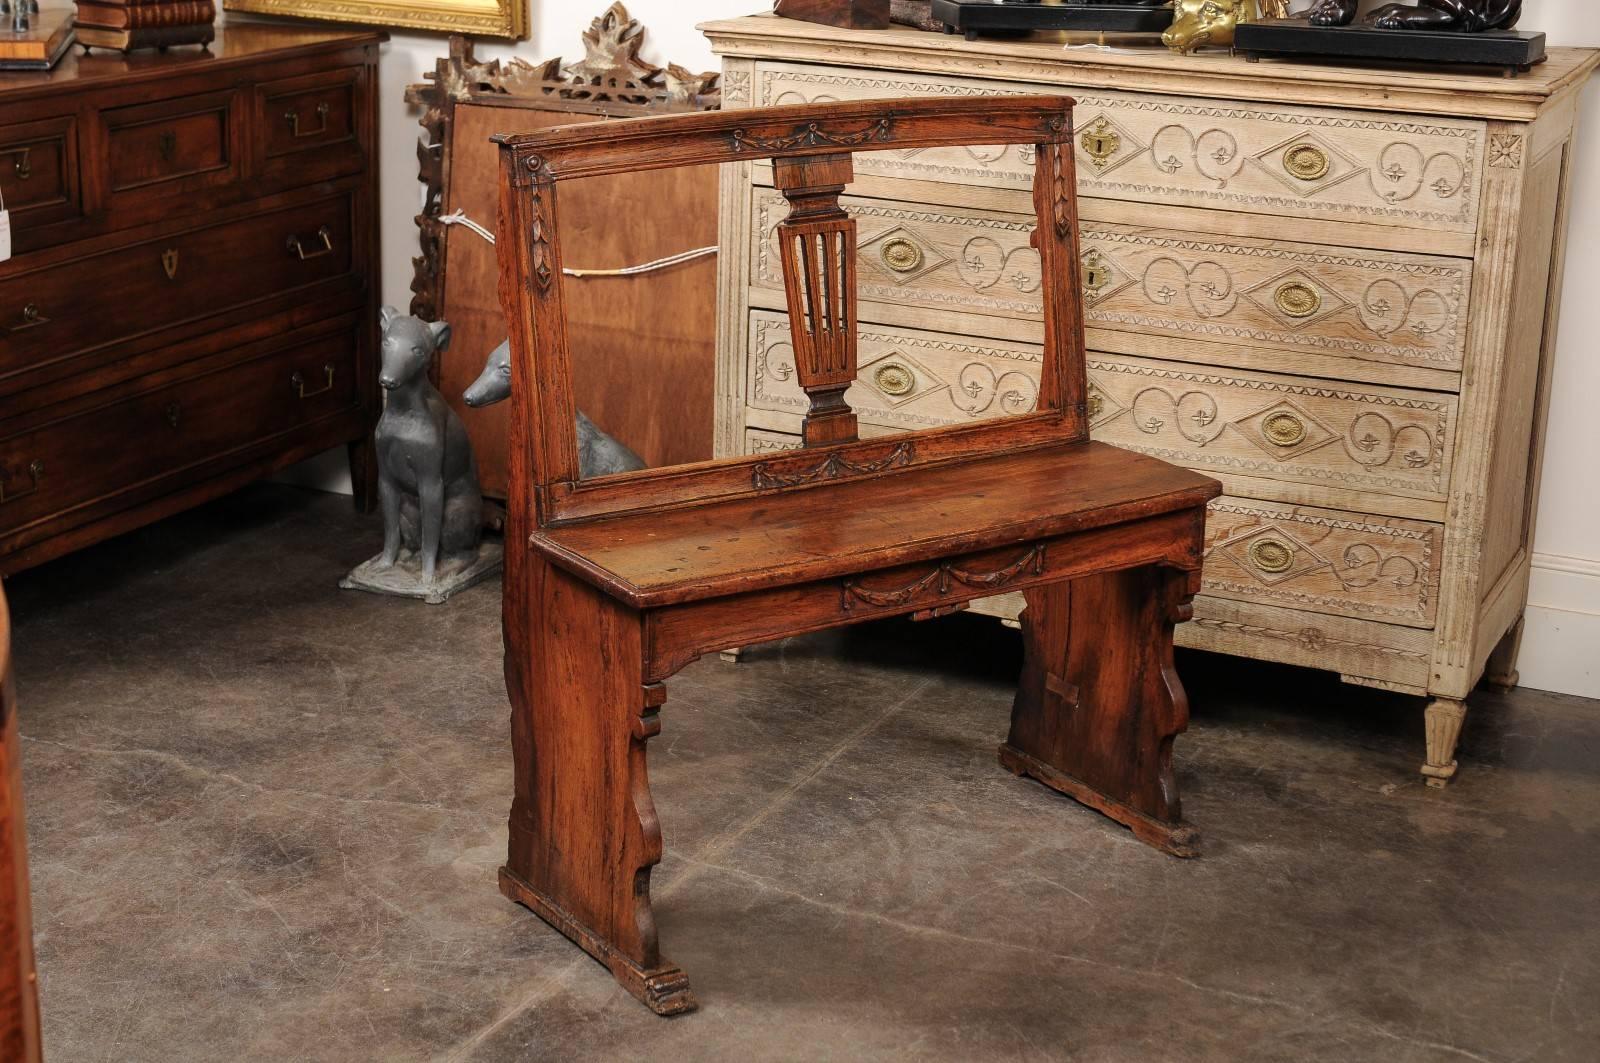 This exquisite Italian walnut bench from the late 18th, early 19th century features a slightly slanted carved back with central pierced and reeded splat adorned with swag motifs in the crest. The piece also features an elegantly carved seat rail.